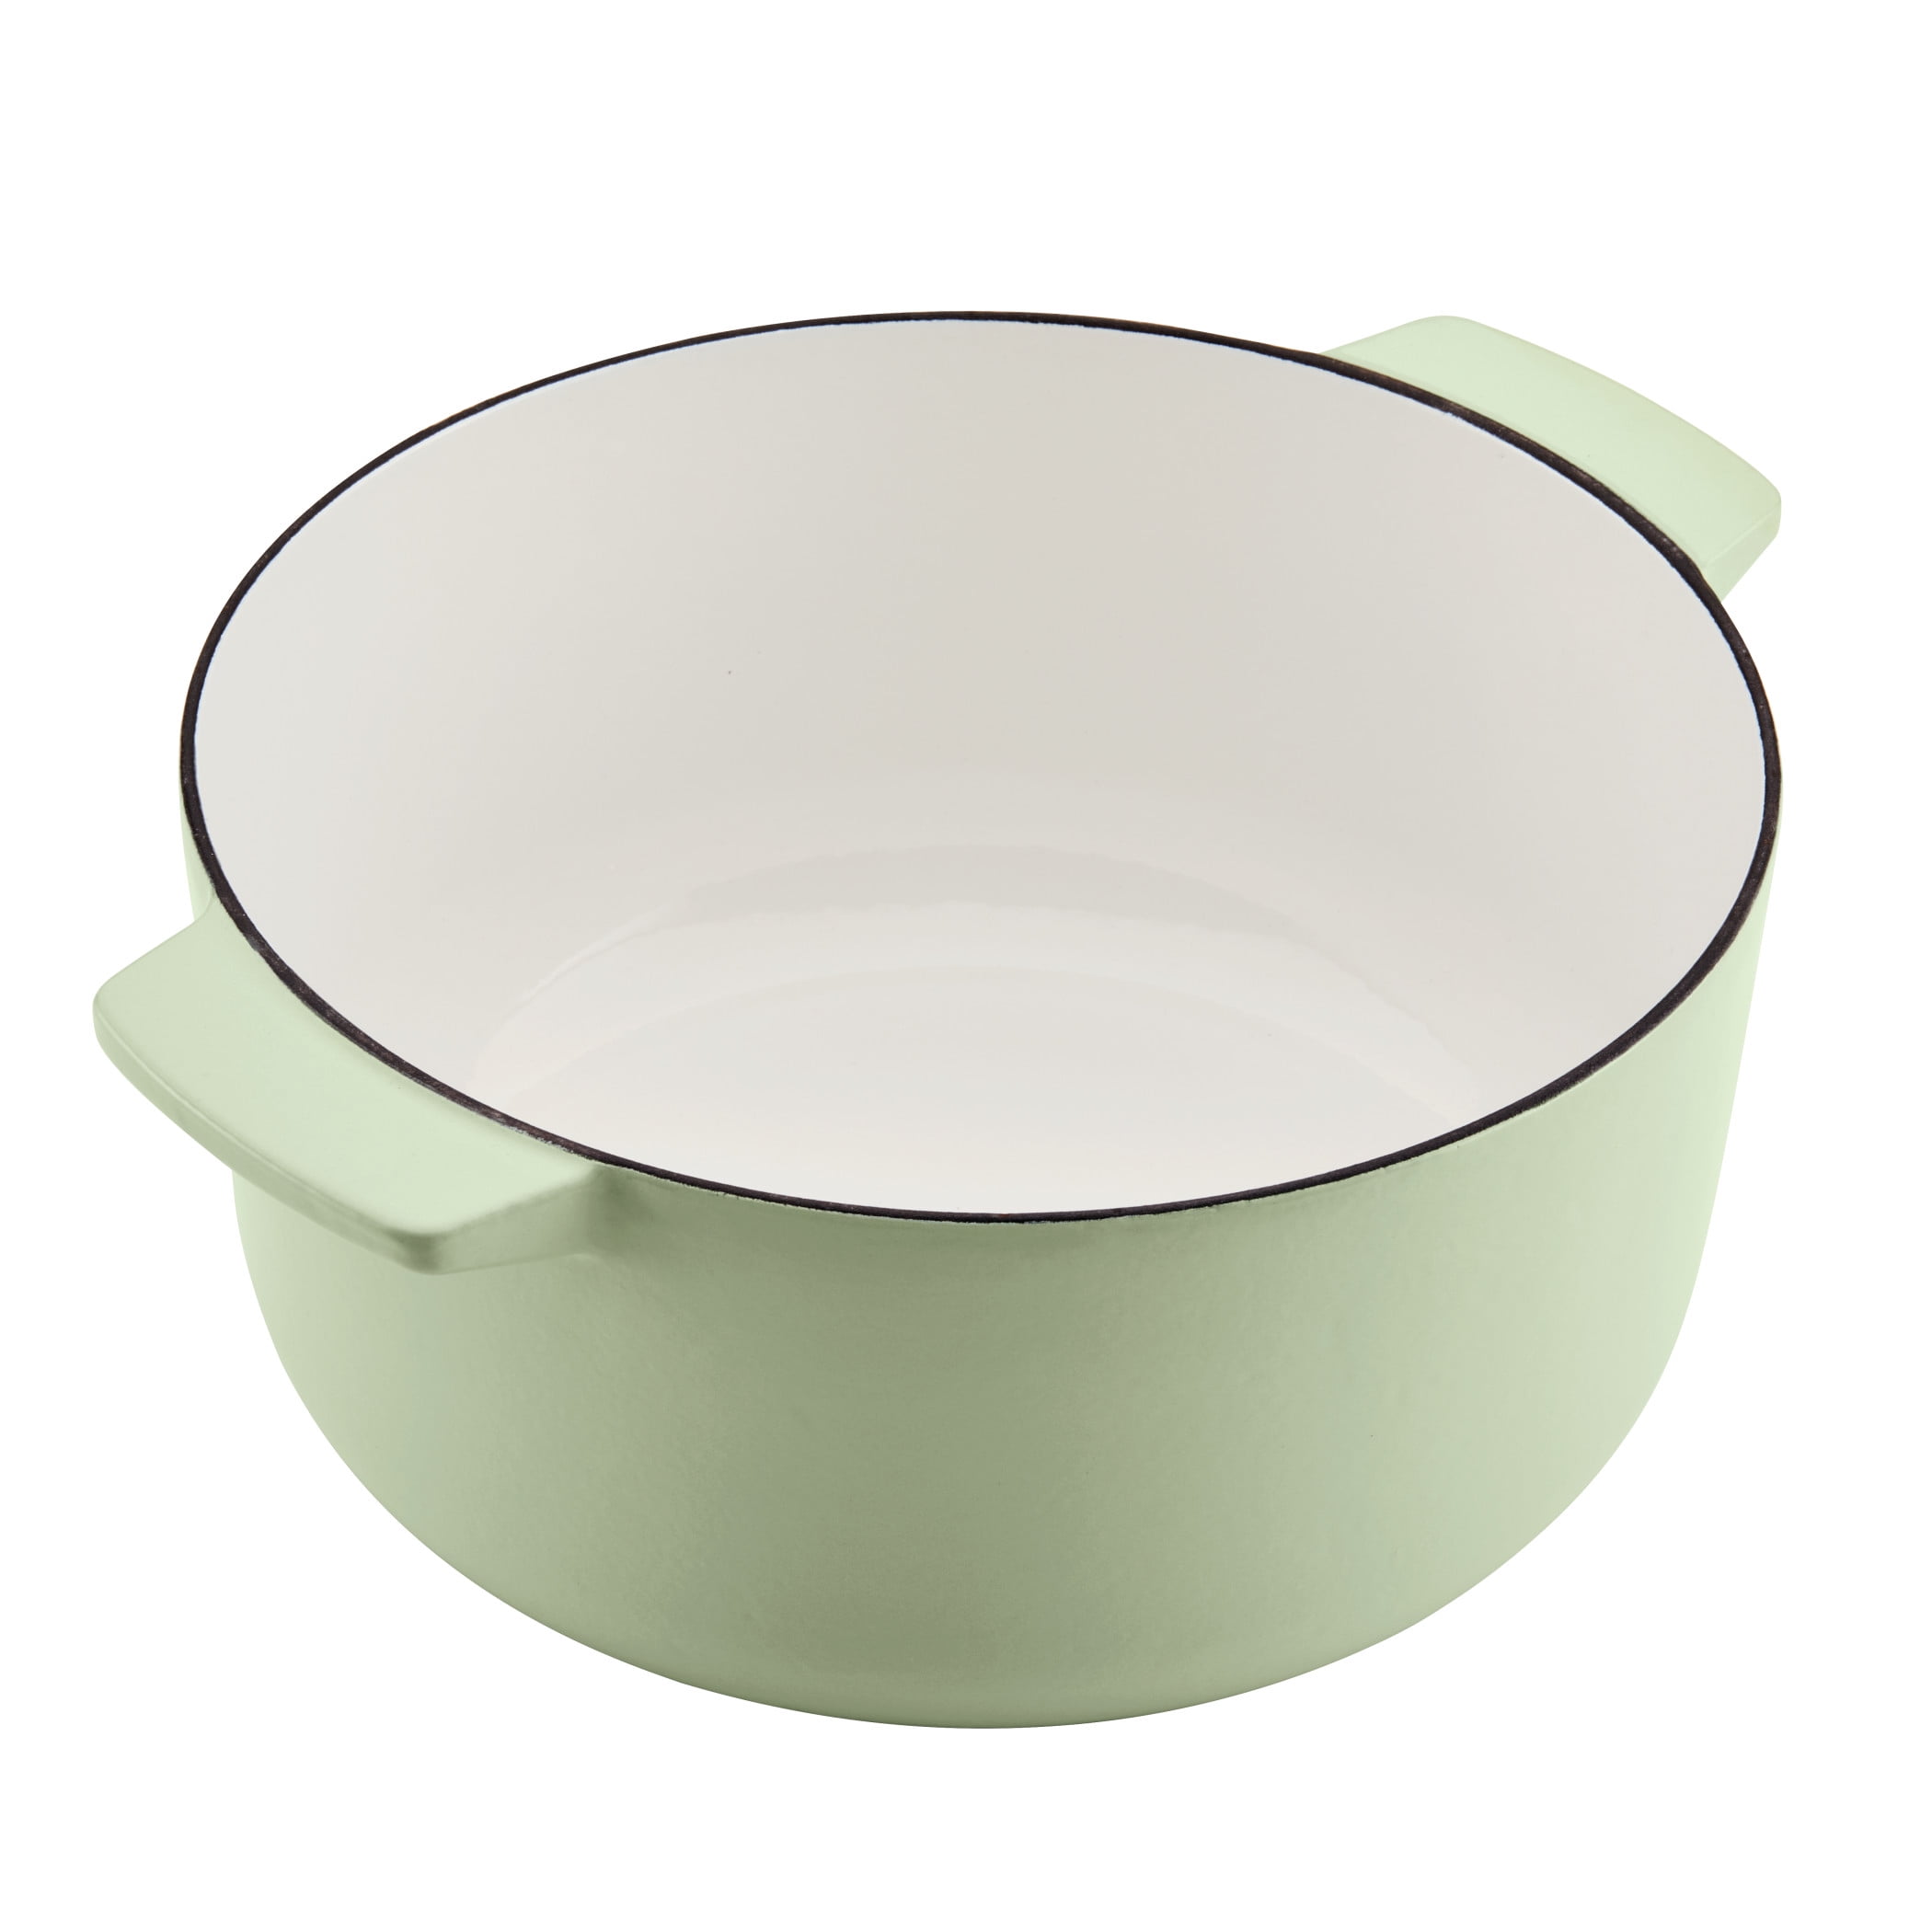 EDGING CASTING Enameled Cast Iron Dutch Oven Pot With Lid, 5.5 Quart, for  Bread Baking, Cooking, Pistachio Green